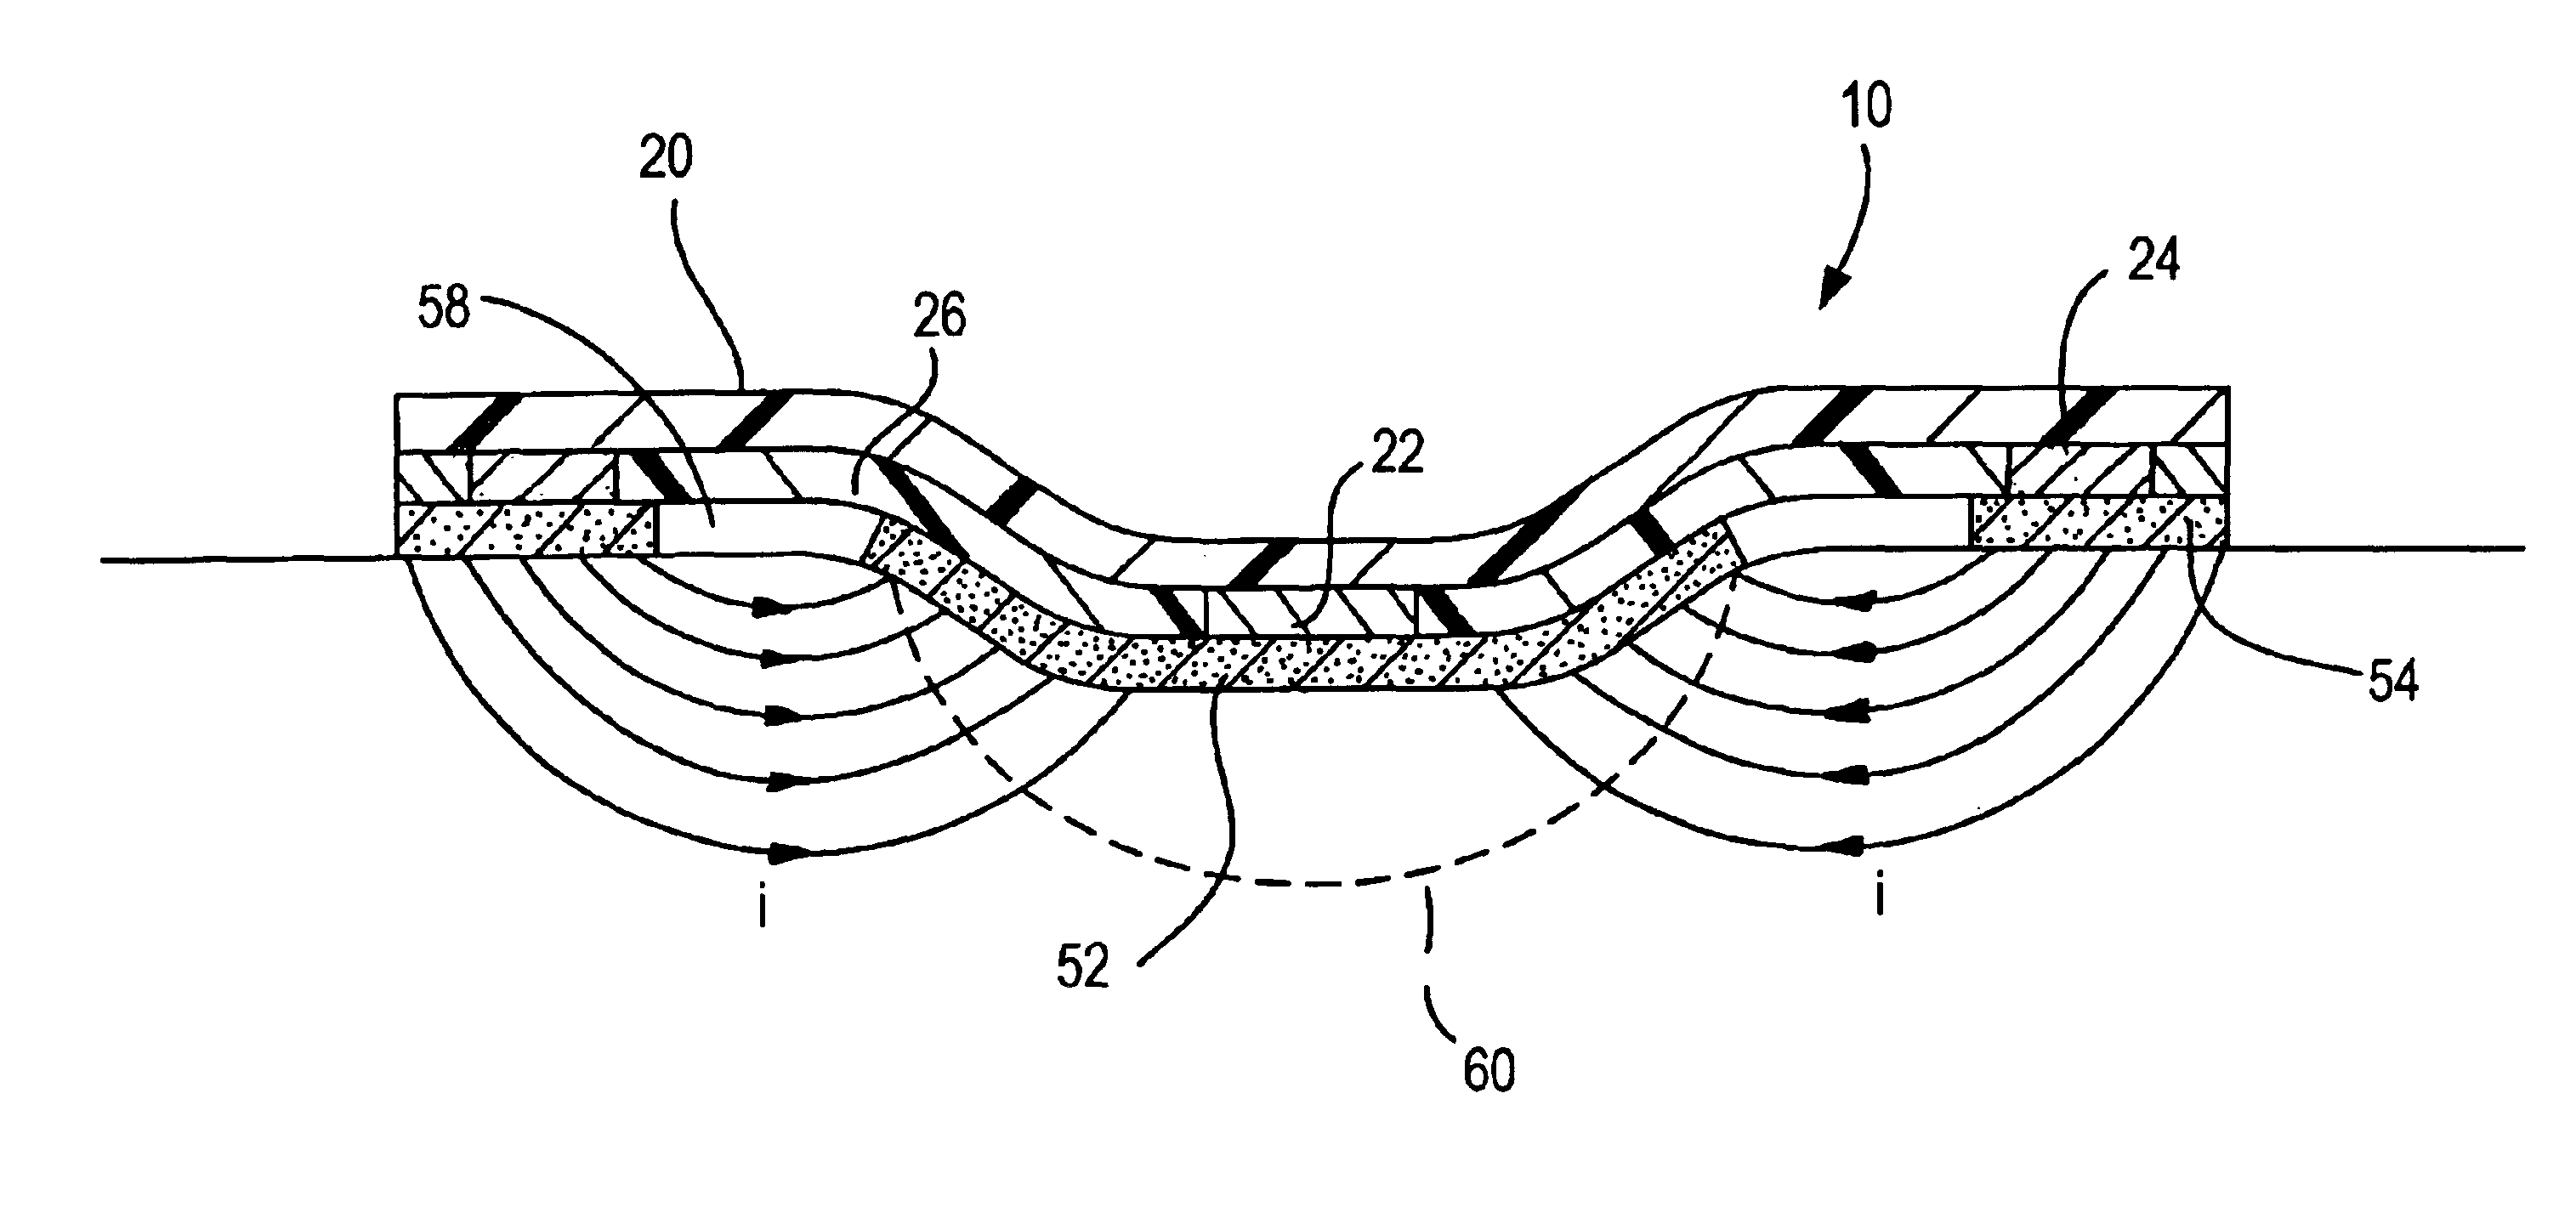 Apparatus and methods for facilitating wound healing